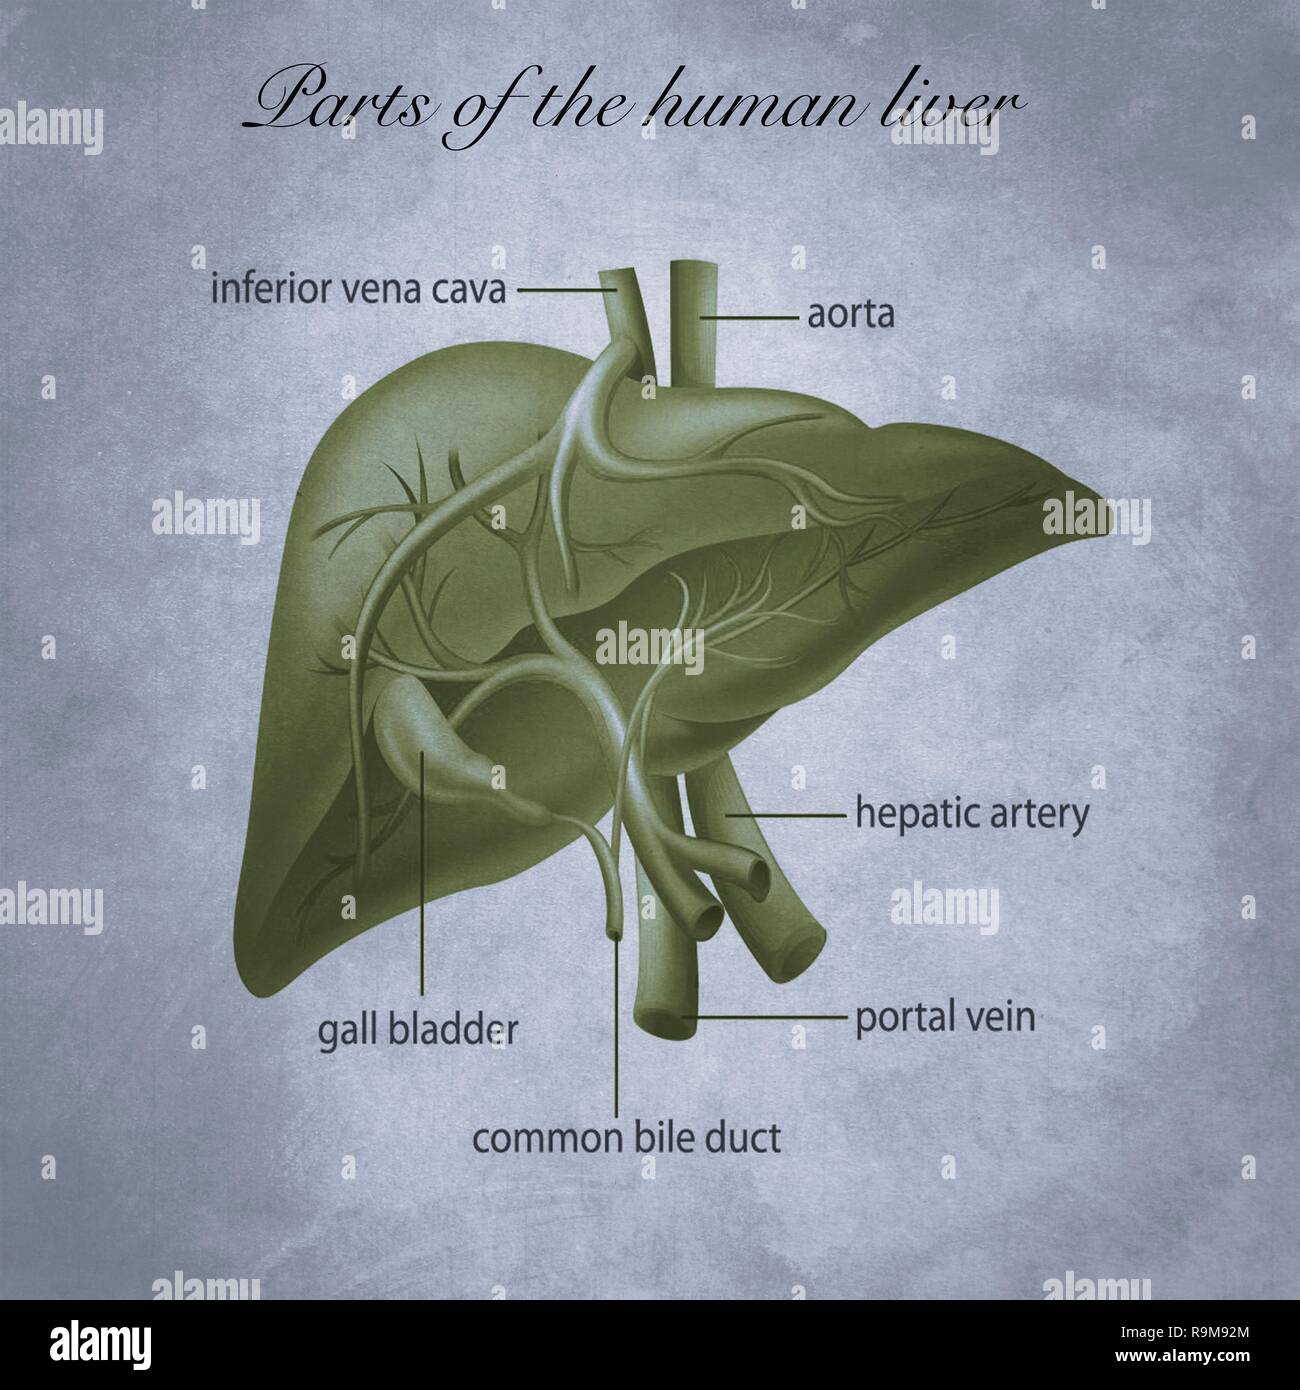 Parts of the human liver, medicine and education Stock Photo